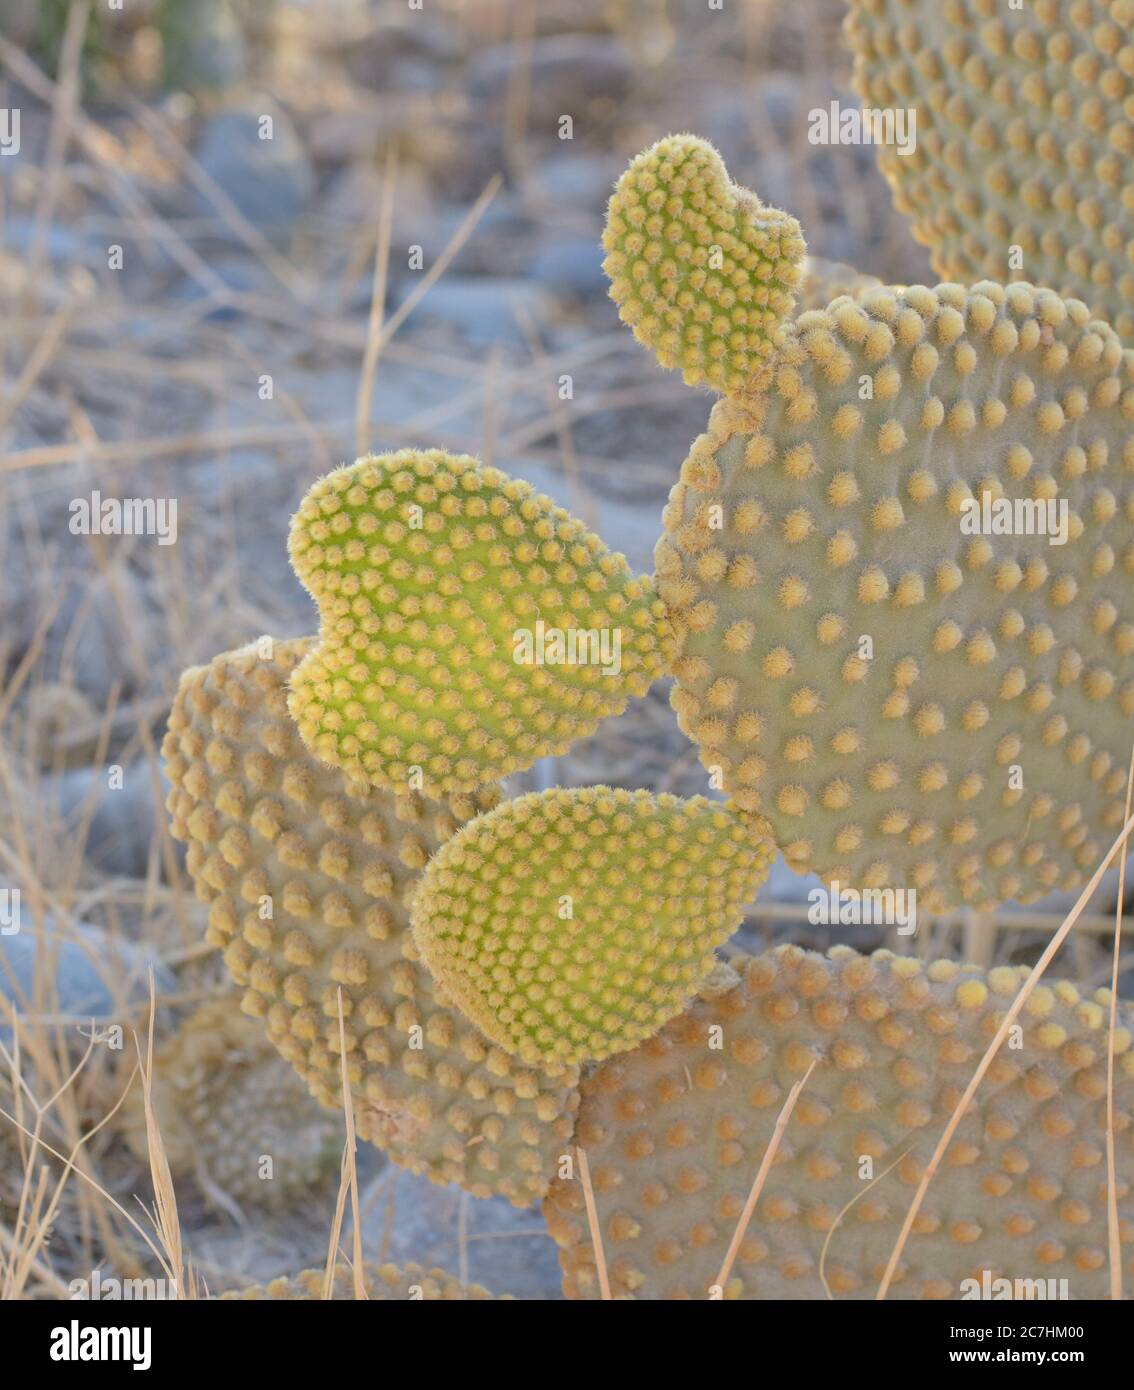 Small yellow spines on a green prickly pear Stock Photo